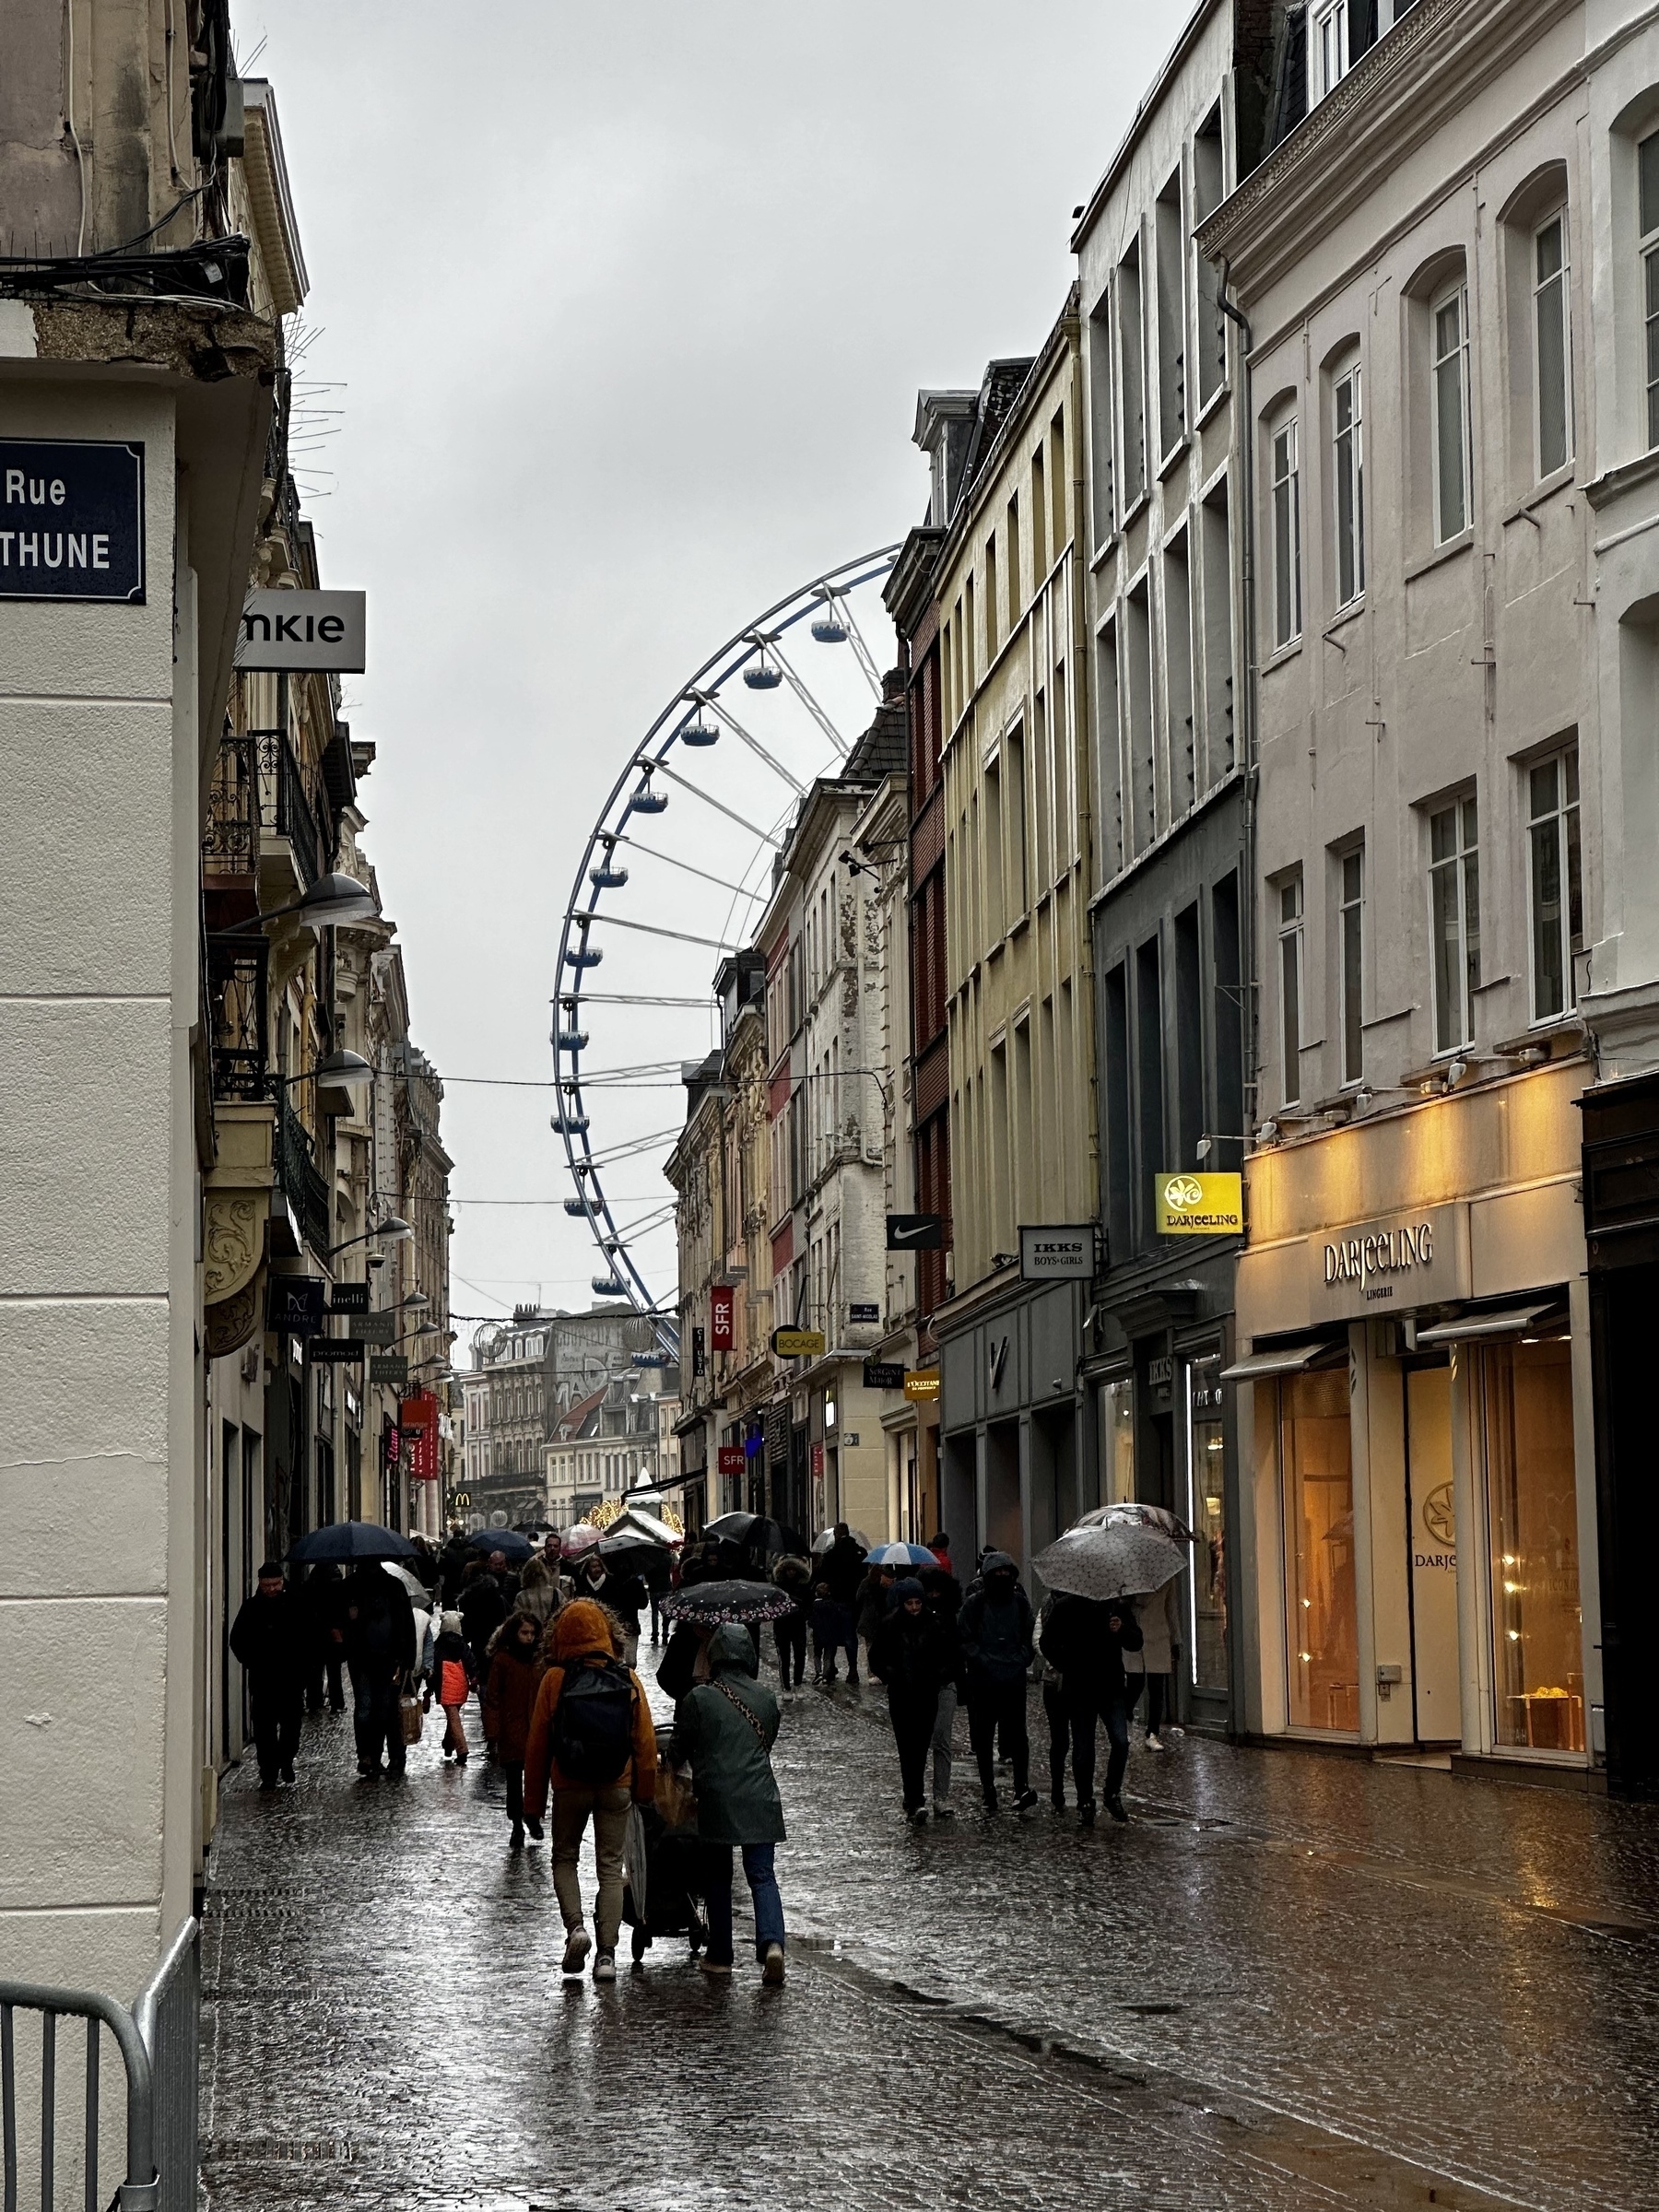 View of a Grande roue on the Grand Place from a side street in the rain